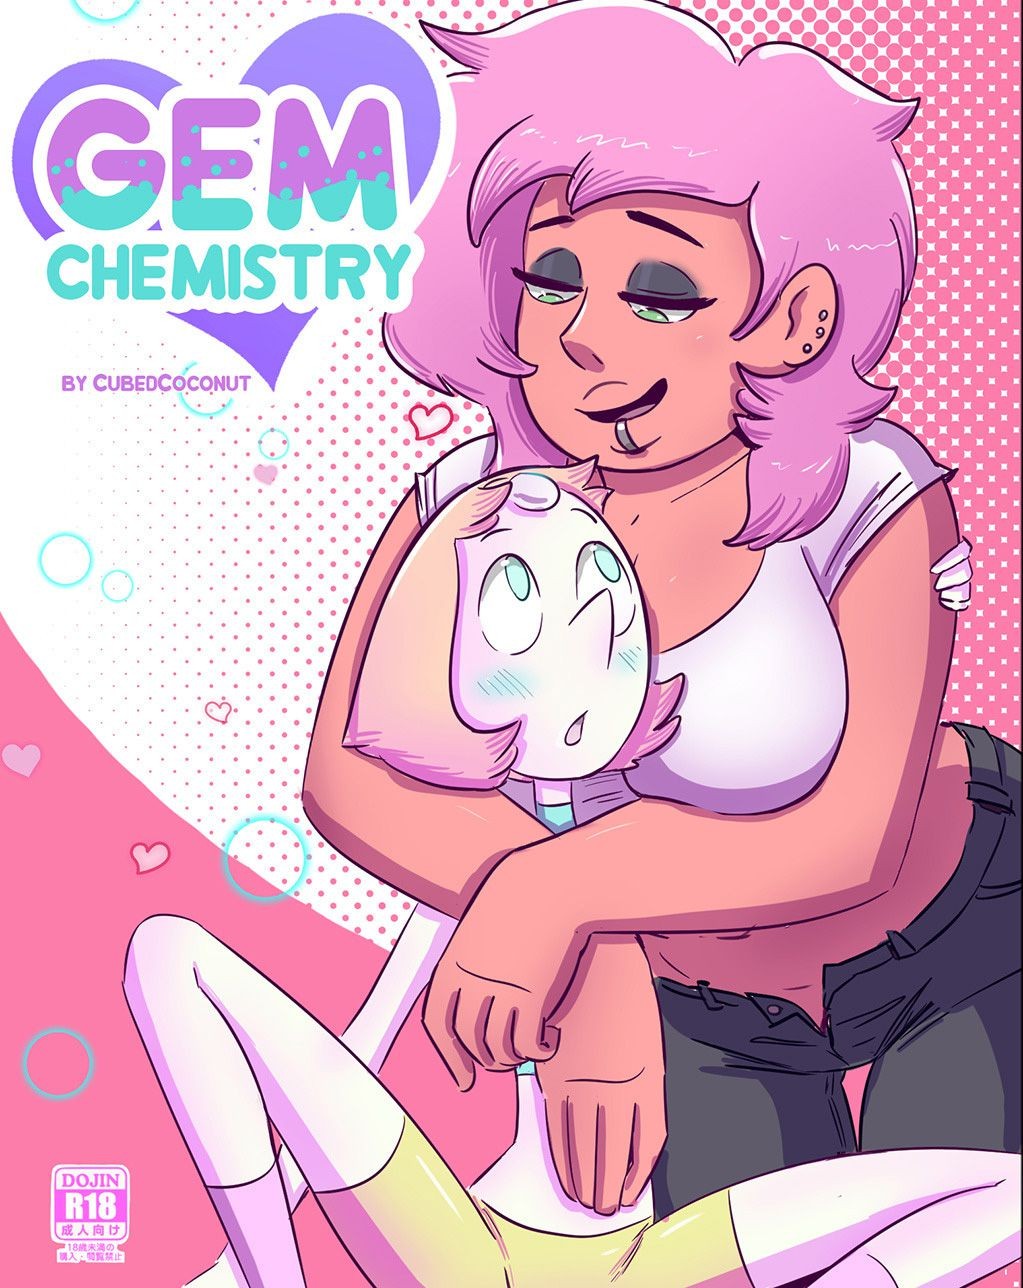 Shemales [CubedCoconut] Gem Chesmistry WIP Tight Pussy